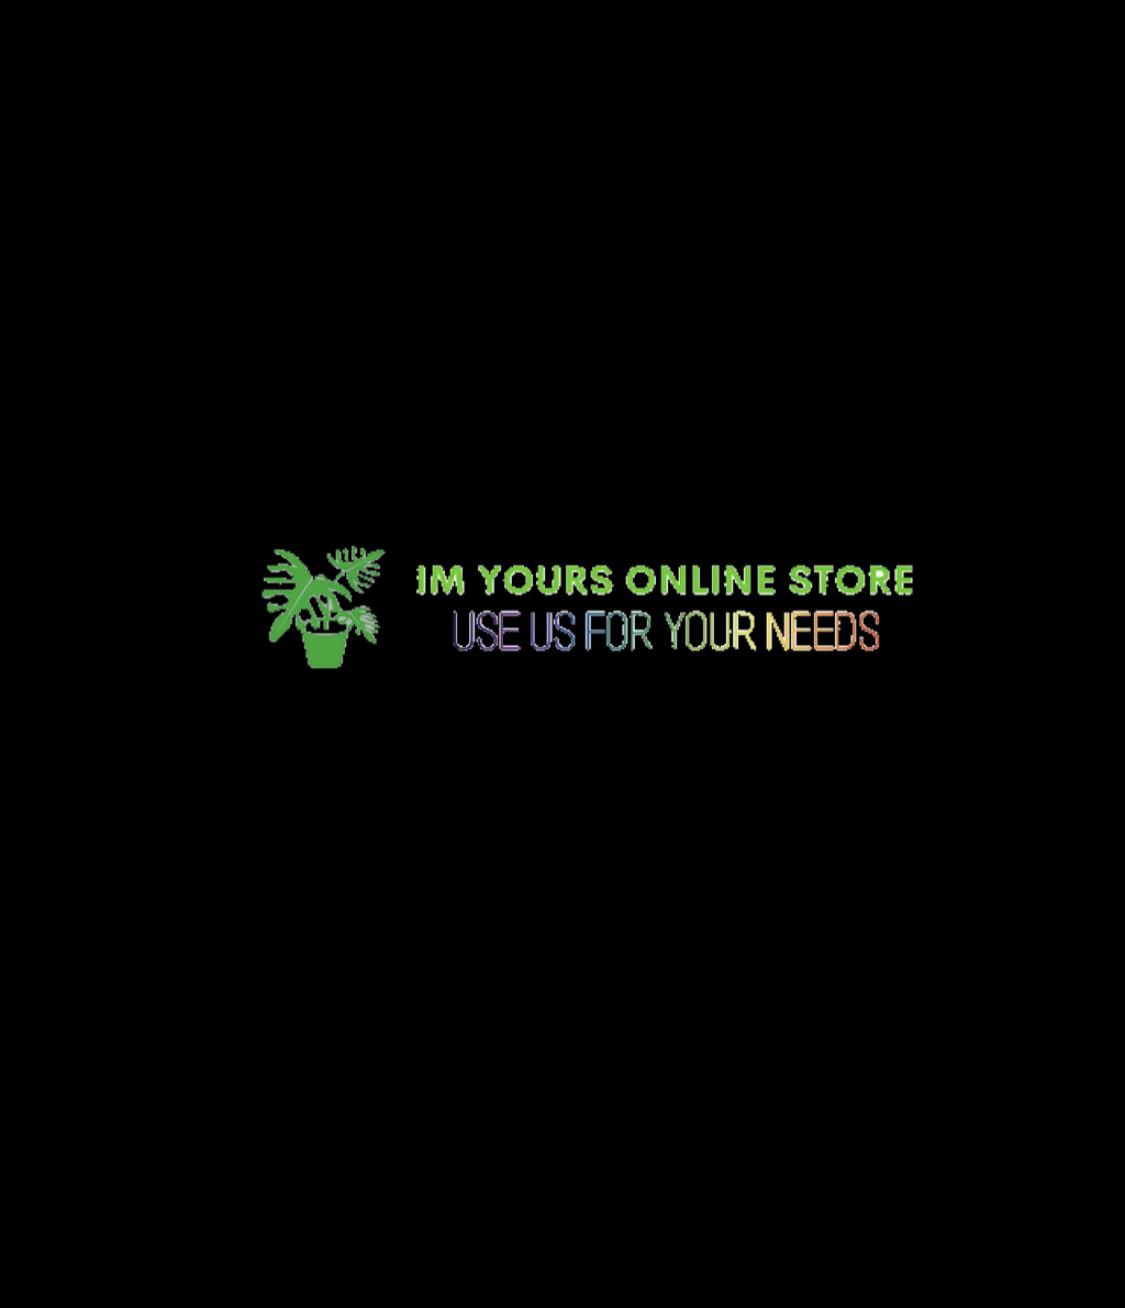 I'm Yours Online Store Logo